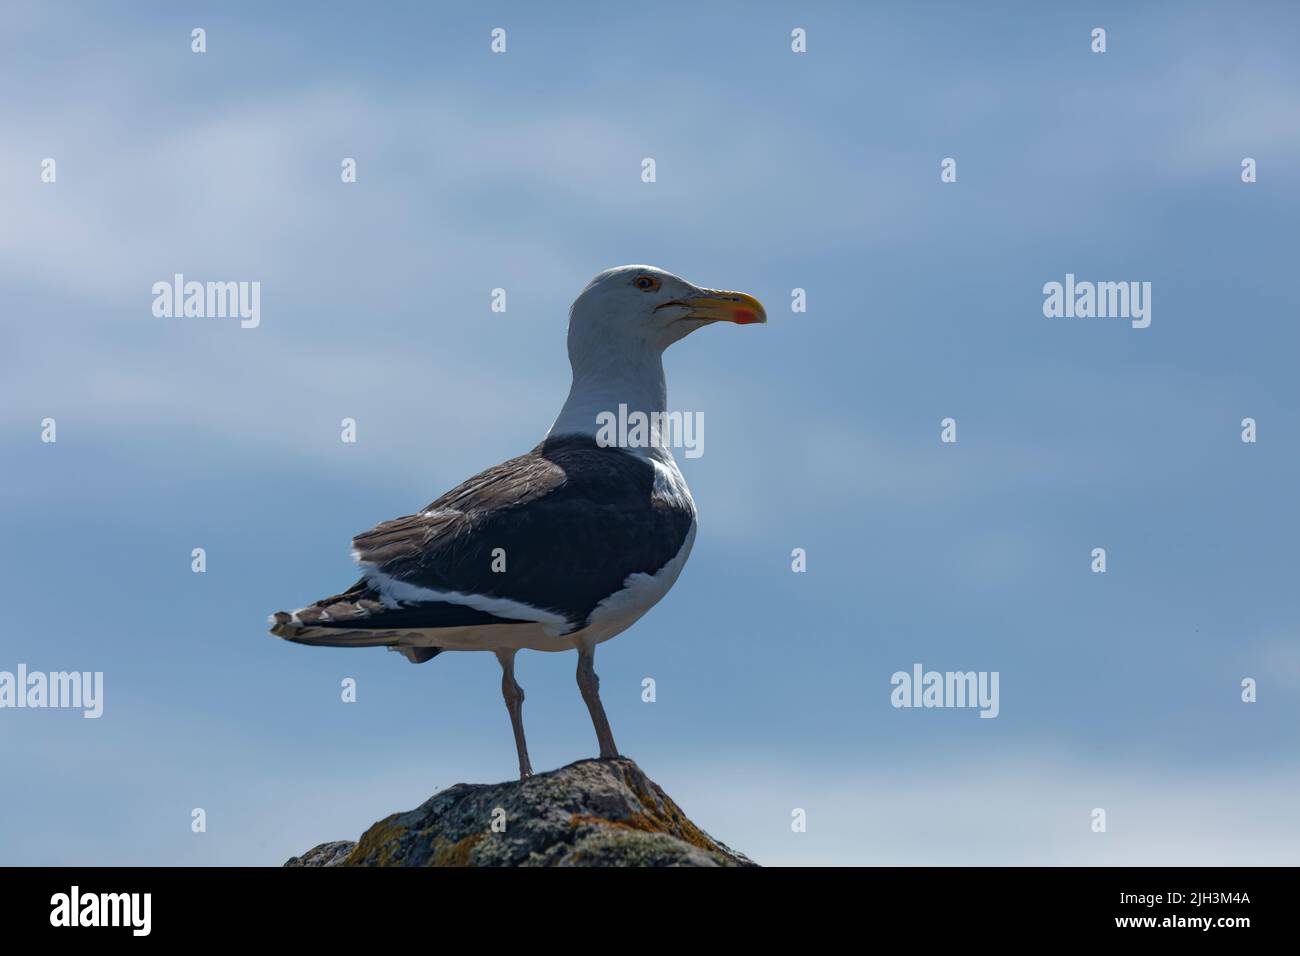 Gull standing on rock with plain blue sky background Stock Photo